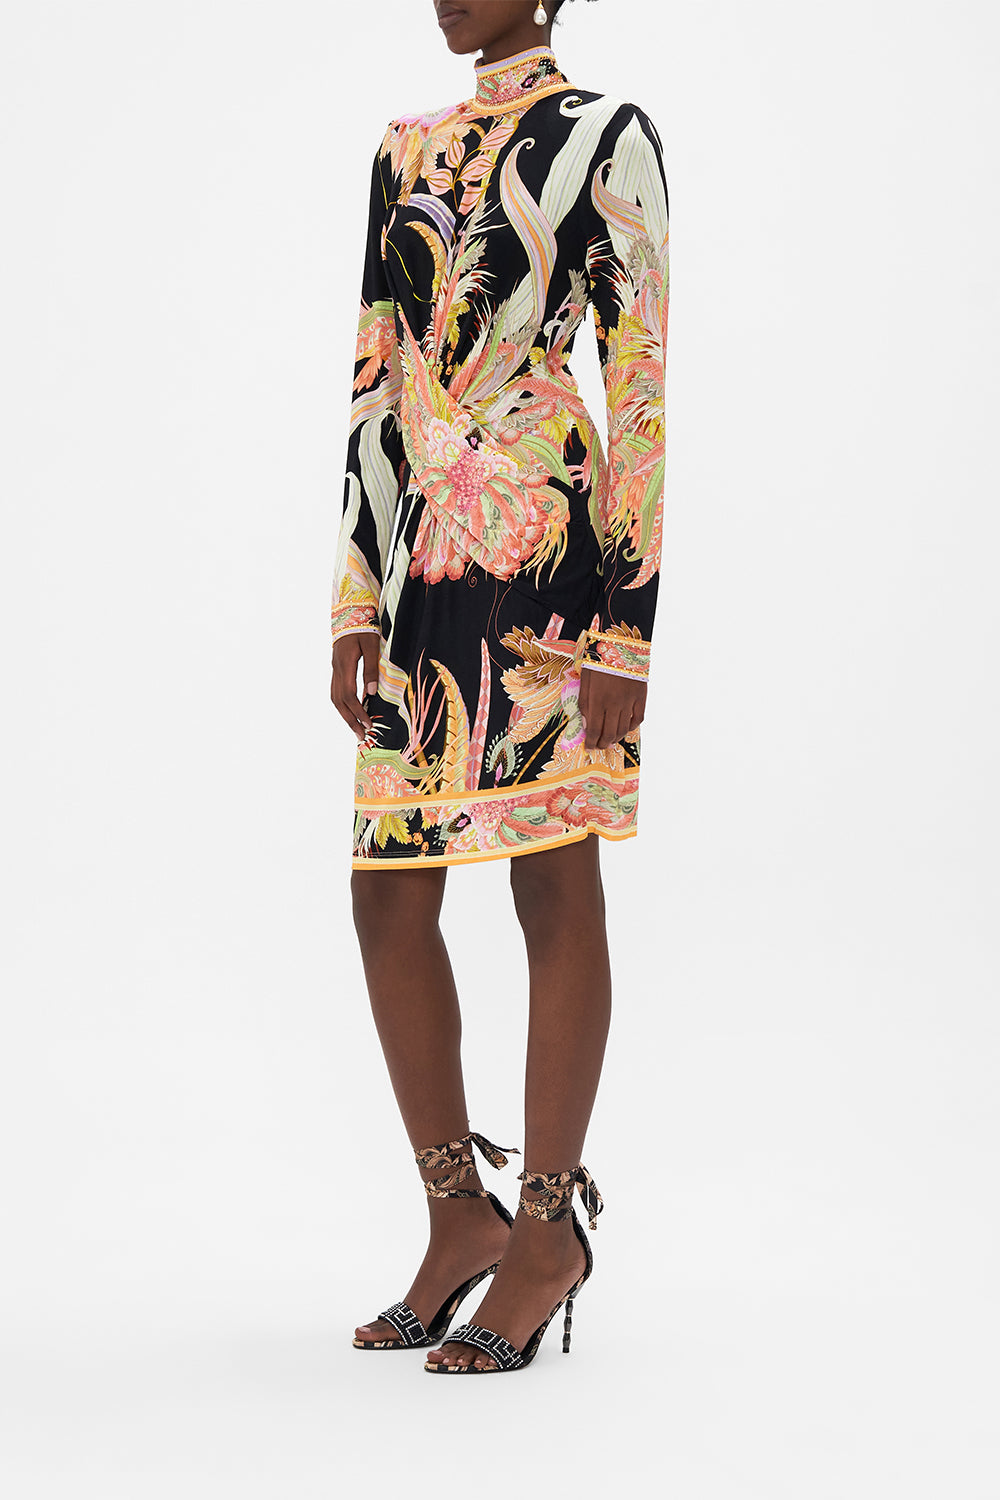 Product view of CAMILLA designer jersey mini dress in Lady of The Moon print